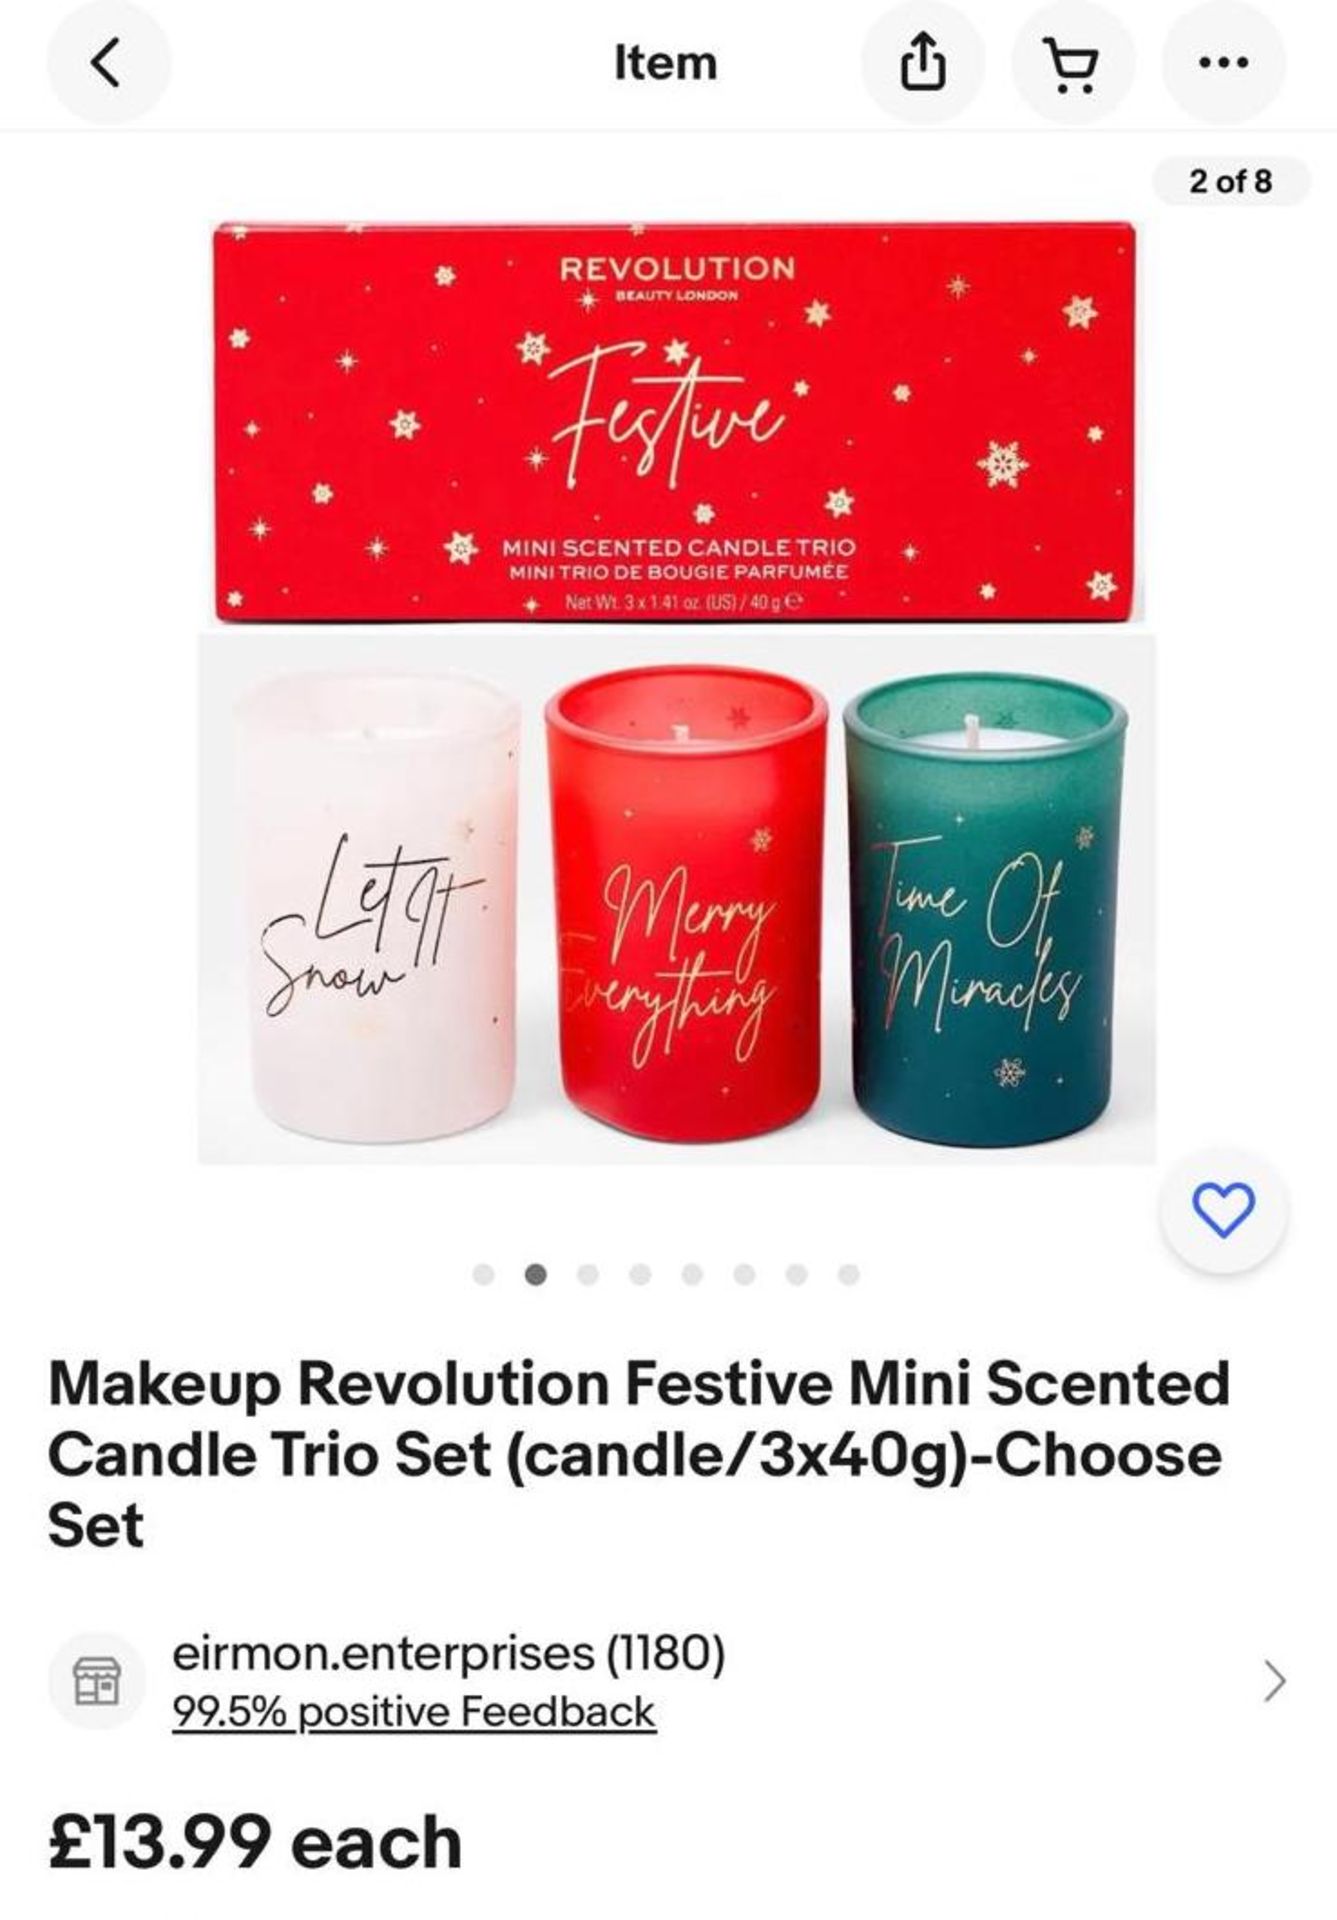 12 x Revolution Beauty London Festive Mini Scented Candle Trio Set - 3 x 40g - (NEW) - RRP Â£214.60 - Image 4 of 4